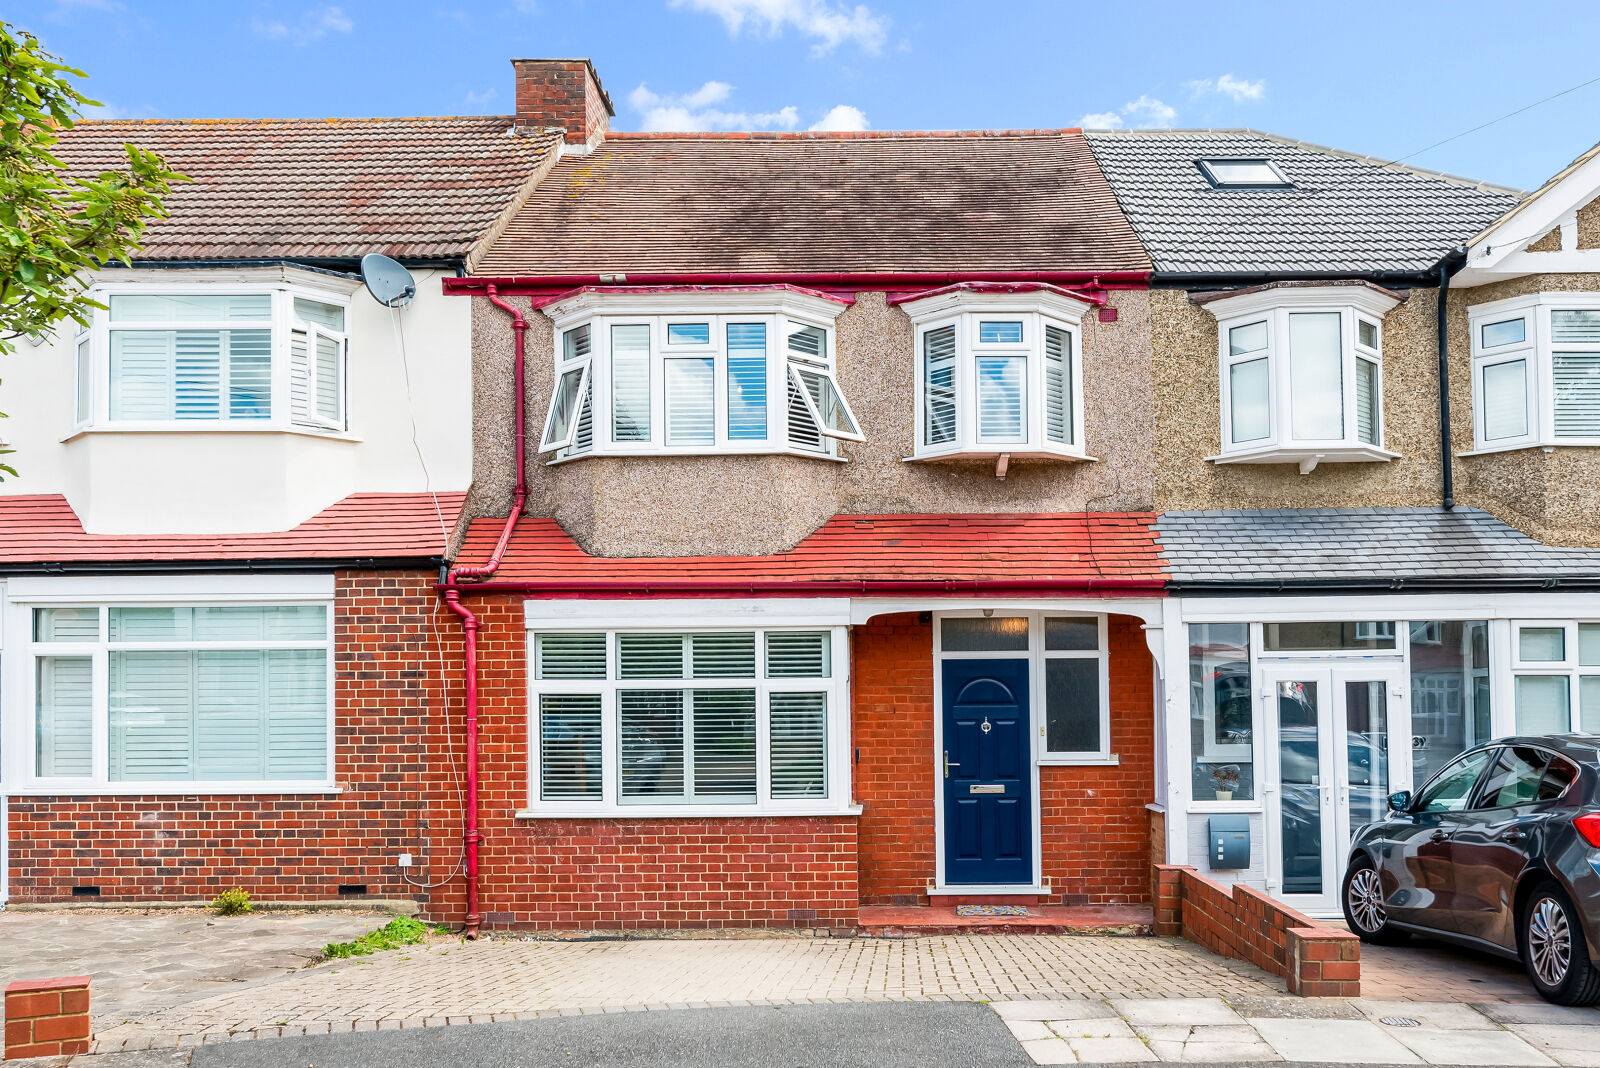 3 bedroom mid terraced house for sale Greenwood Close, Morden, SM4, main image